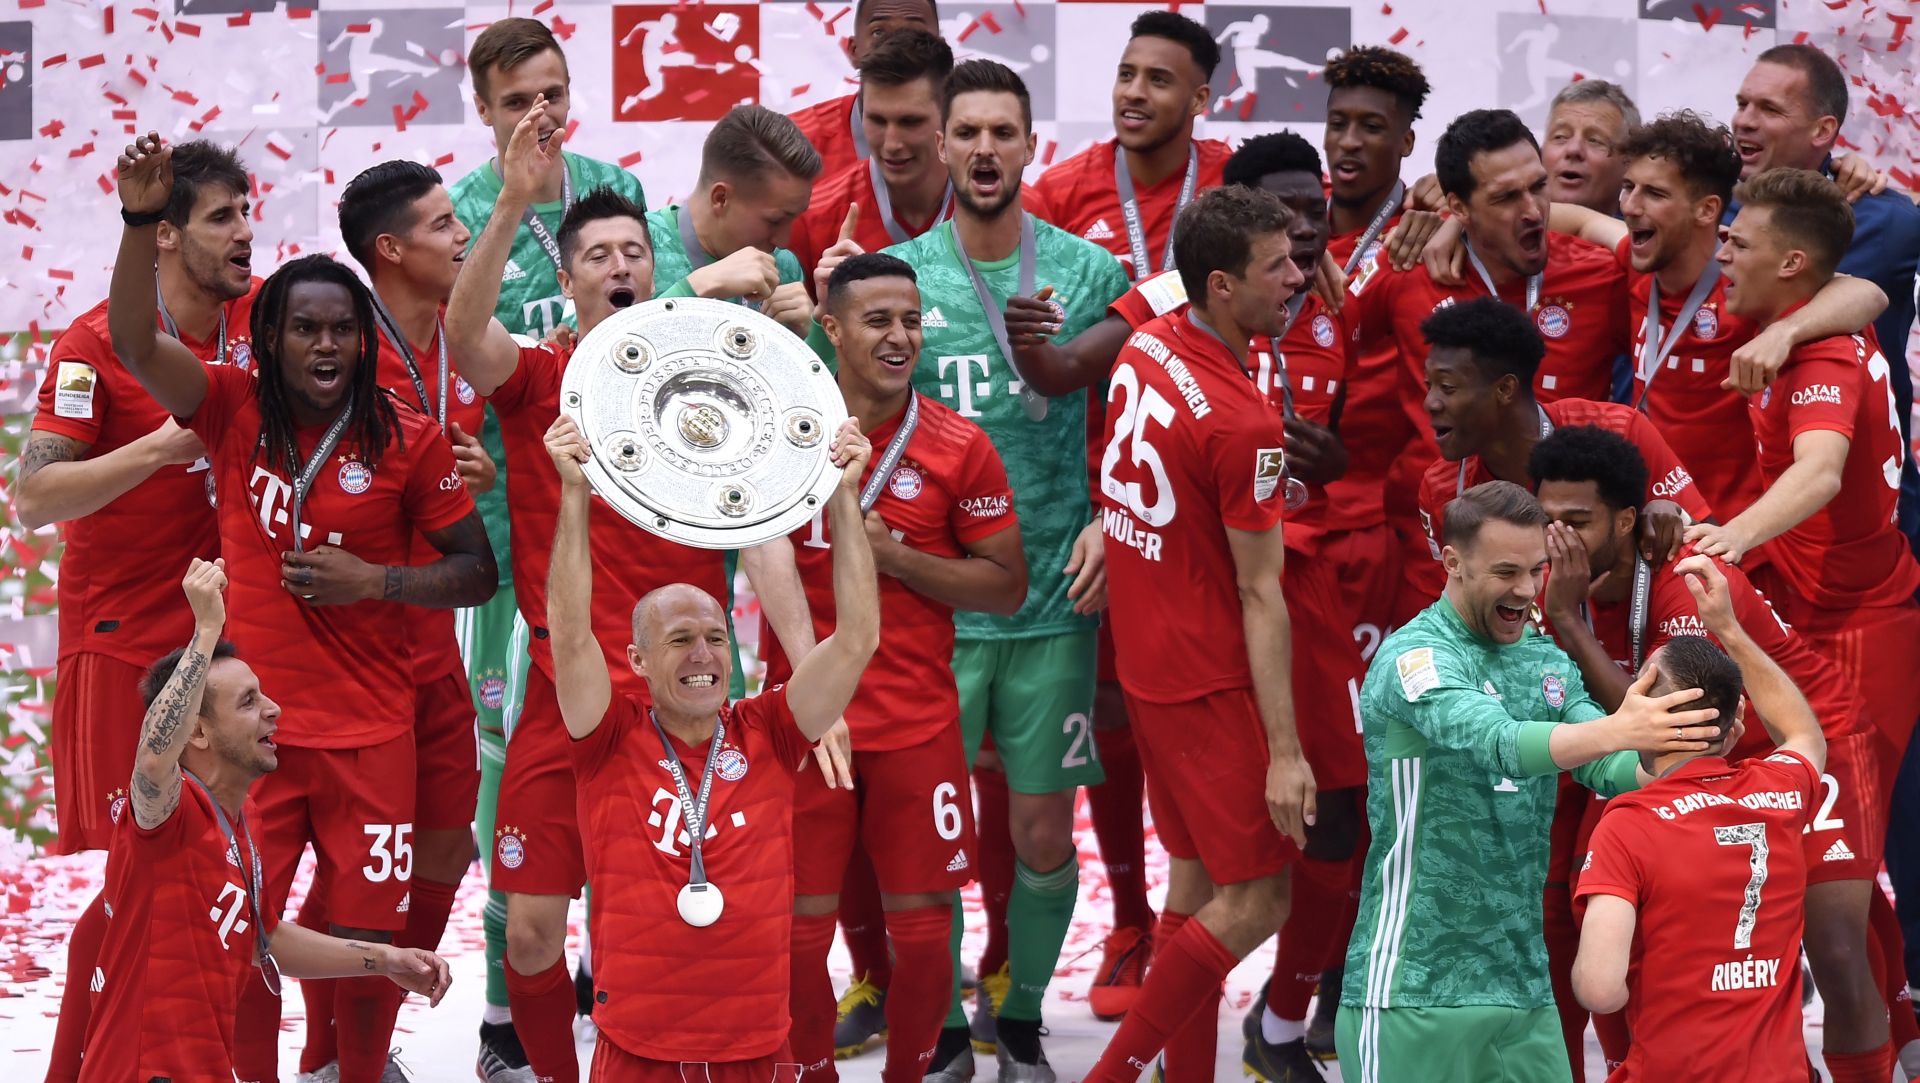 epa07581595 Munich team celebrate with the trophy after winning the German championship after the German Bundesliga soccer match between FC Bayern Munich and Eintracht Frankfurt in Munich, Germany, 18 May 2019.  EPA/LUKAS BARTH-TUTTAS CONDITIONS - ATTENTION: The DFL regulations prohibit any use of photographs as image sequences and/or quasi-video.